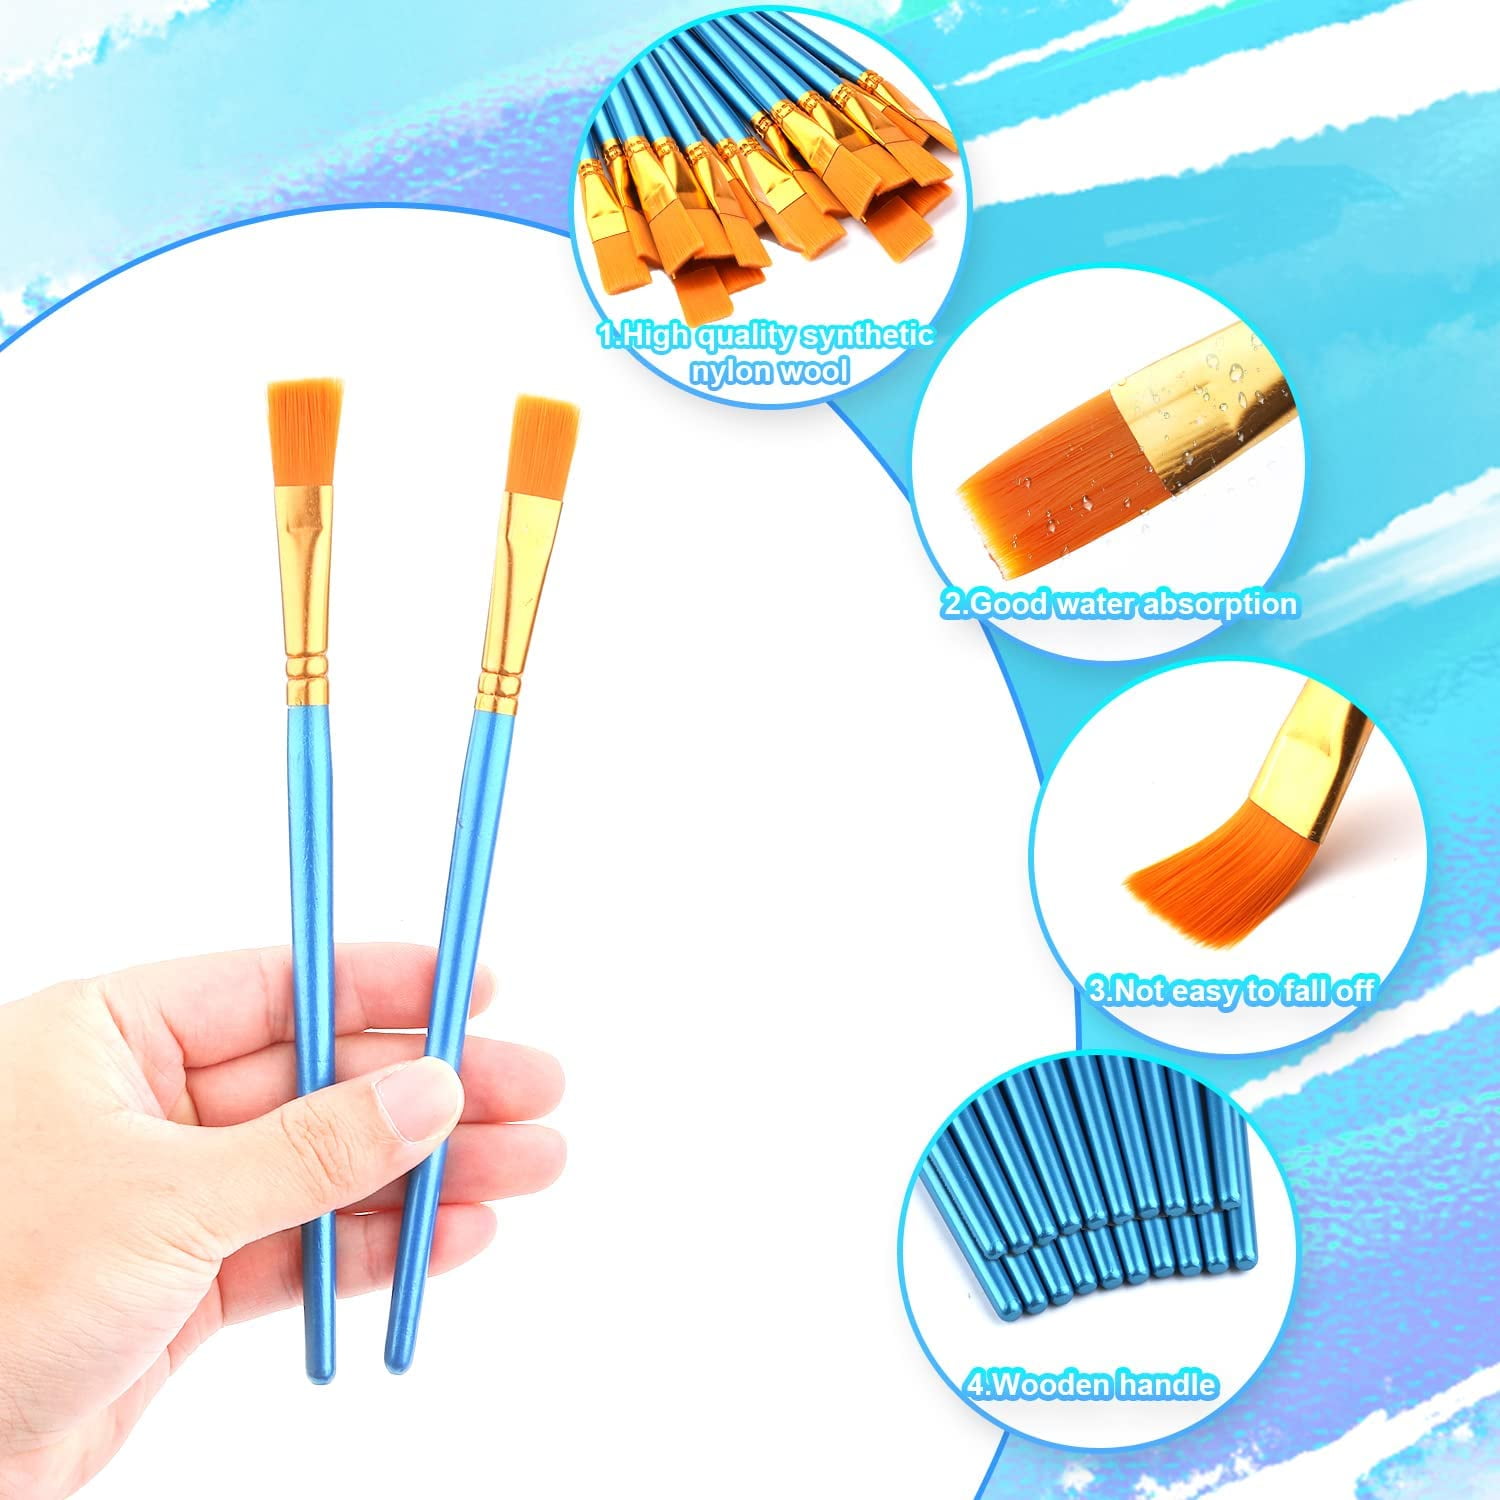 20pcs Flat Small Art Paint Brushes 0.5 inch Wide, Watercolor Acrylic Paint Brushes Bulk Synthetic Nylon Oil Painting Brushes for Artists Professional